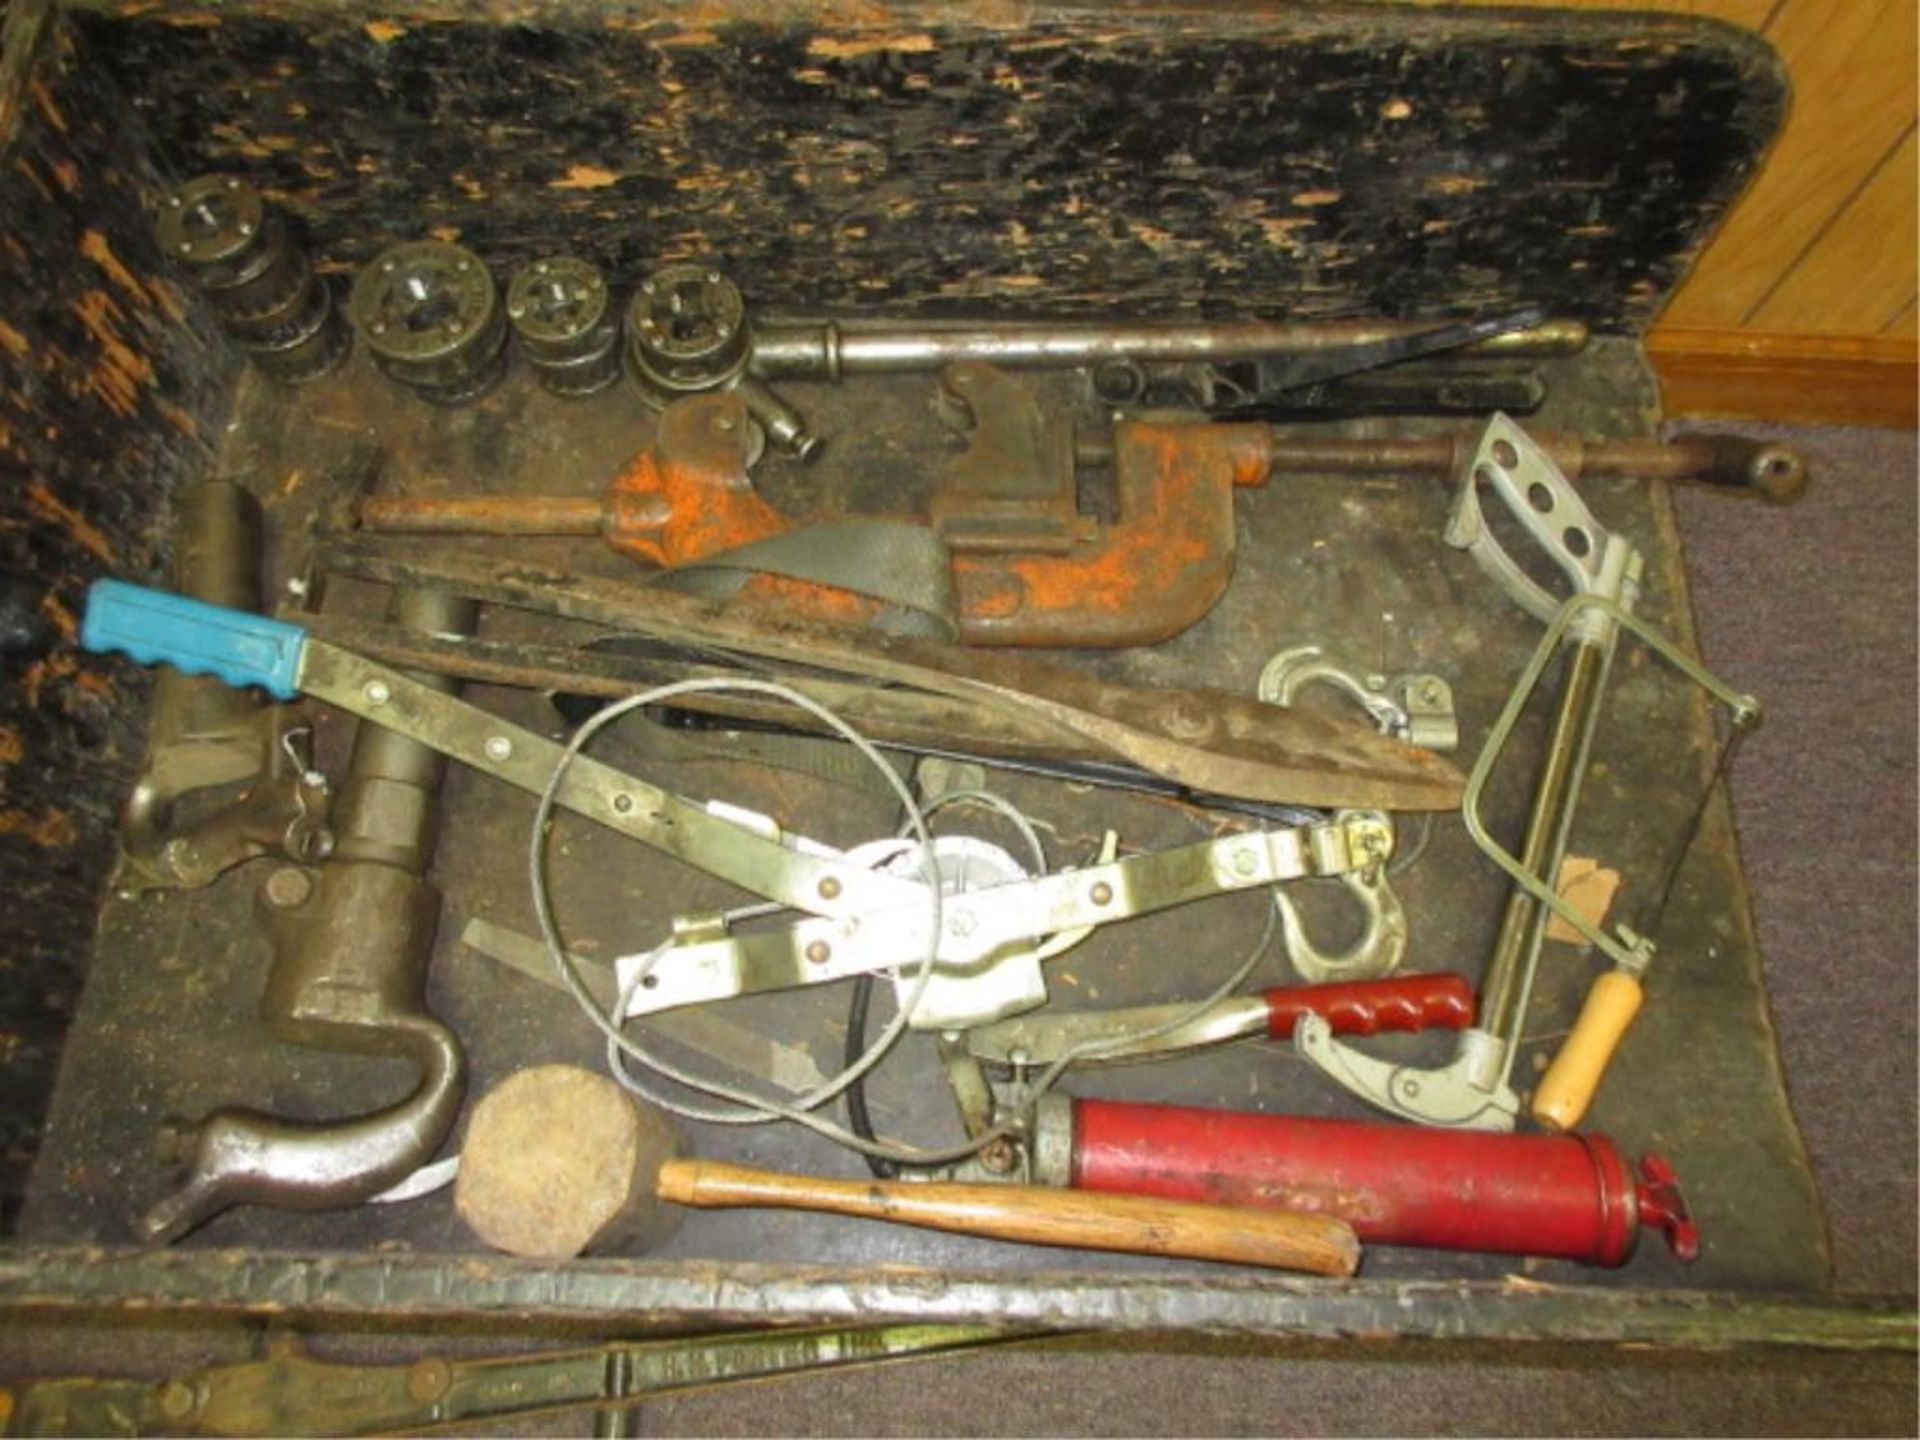 Lot (approx. 50pcs) Assorted Hand Tools, includes but not limited to: pipe wrenches, bolt cutter, - Image 2 of 3